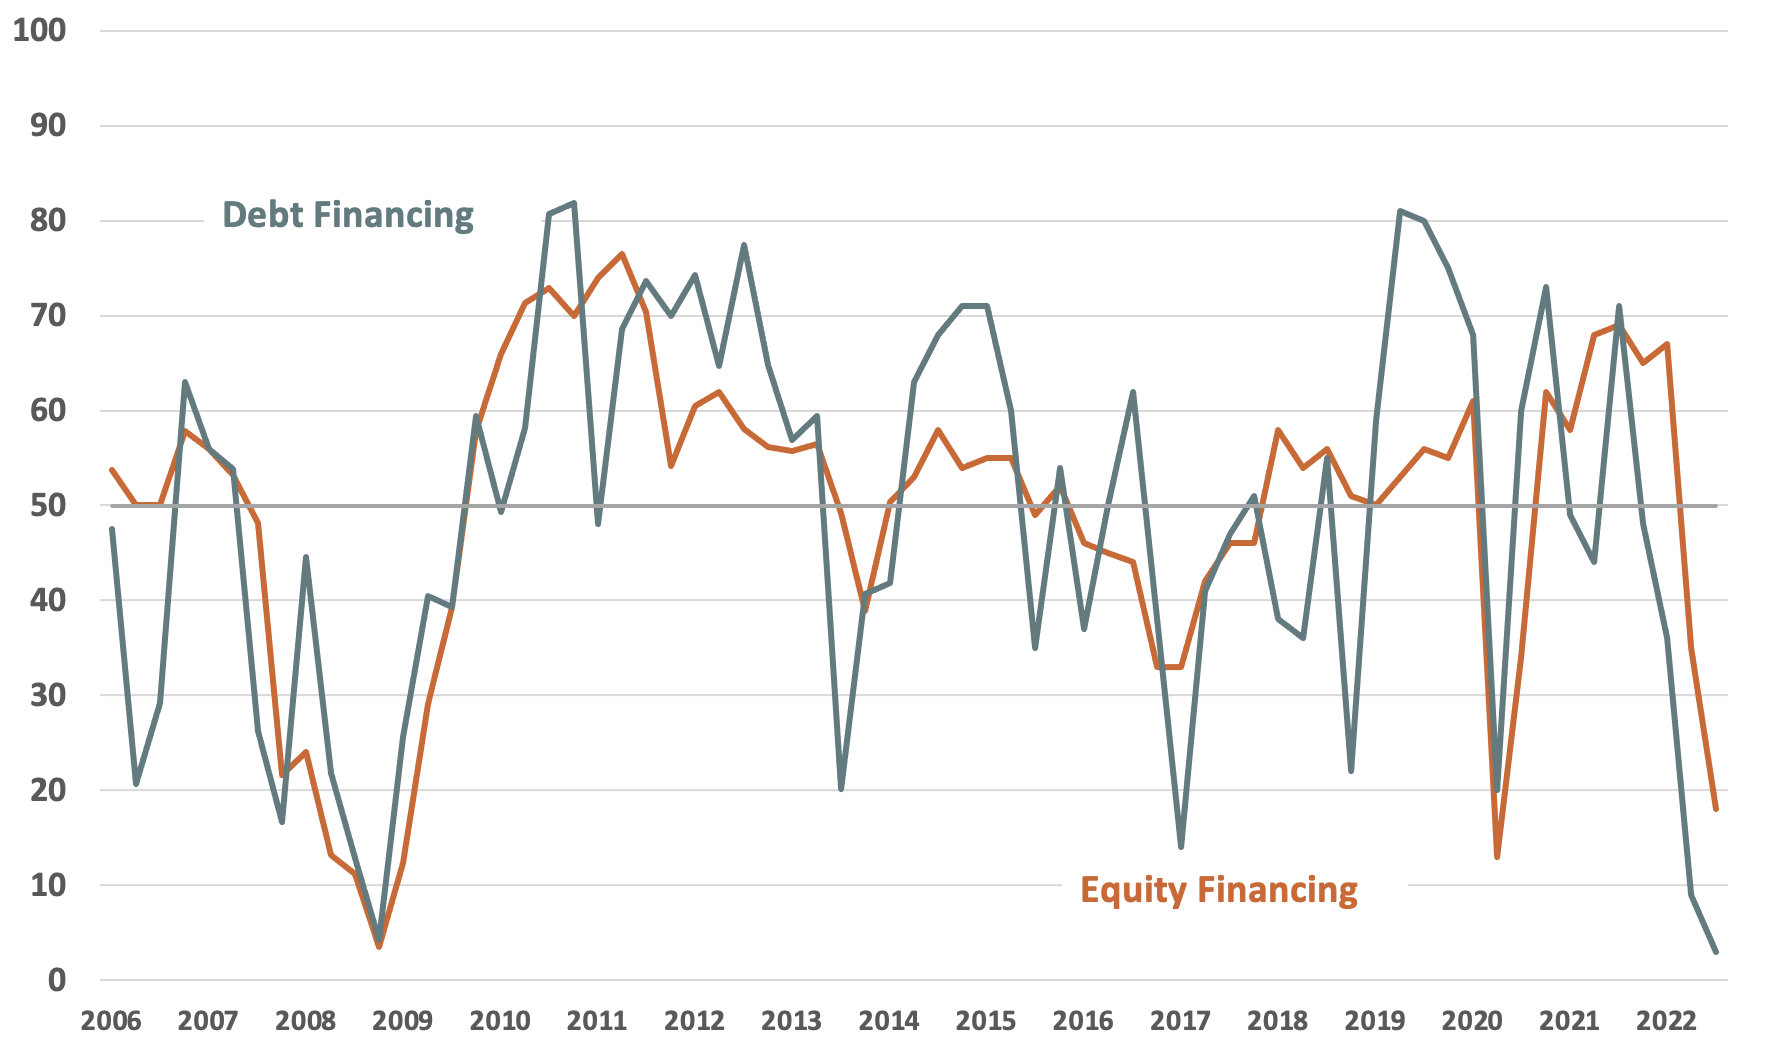 April 2022 Chart 2 - Debt financing and Equity Financing